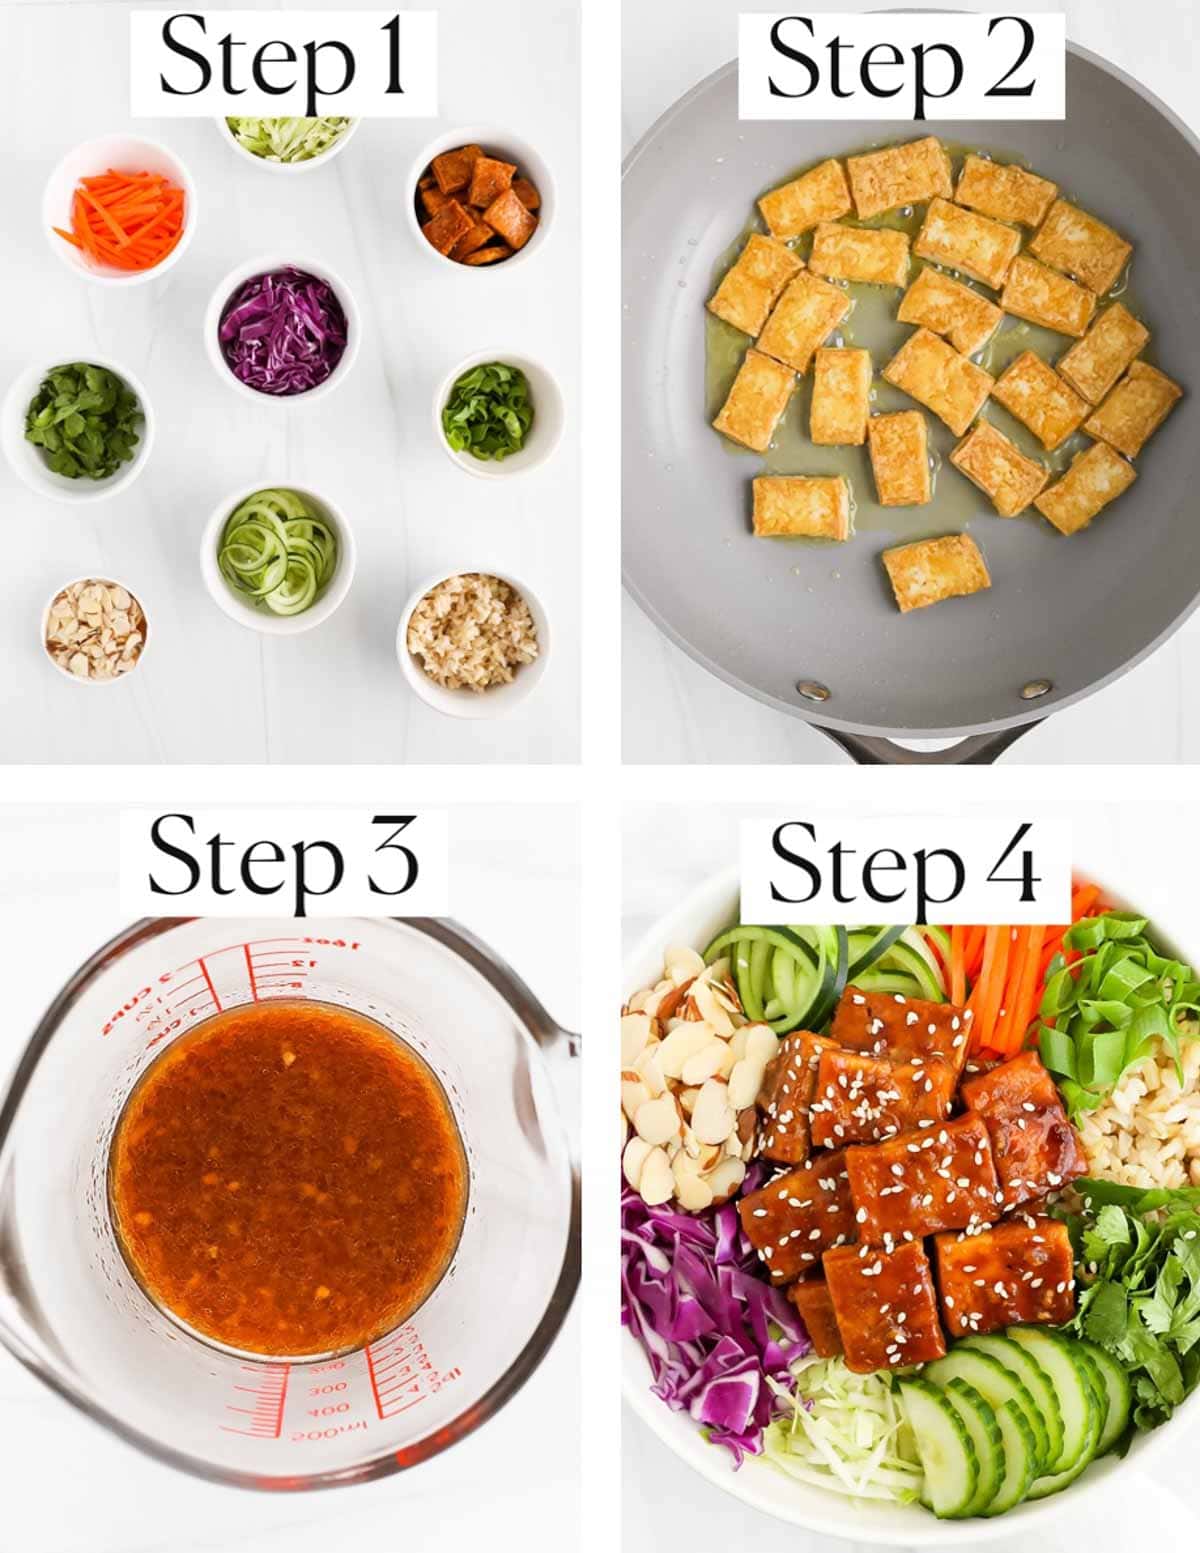 A collage of four images labeled "step 1-step 4". Step 1: vegetables, rice, and tofu in small white bowls. Step 2: tofu cooking in a pan. Step 3: sauce mixed in a measuring cup. Step 4: A finished power bowl with carrots, cucumber, cabbage, almonds, rice, and tofu.